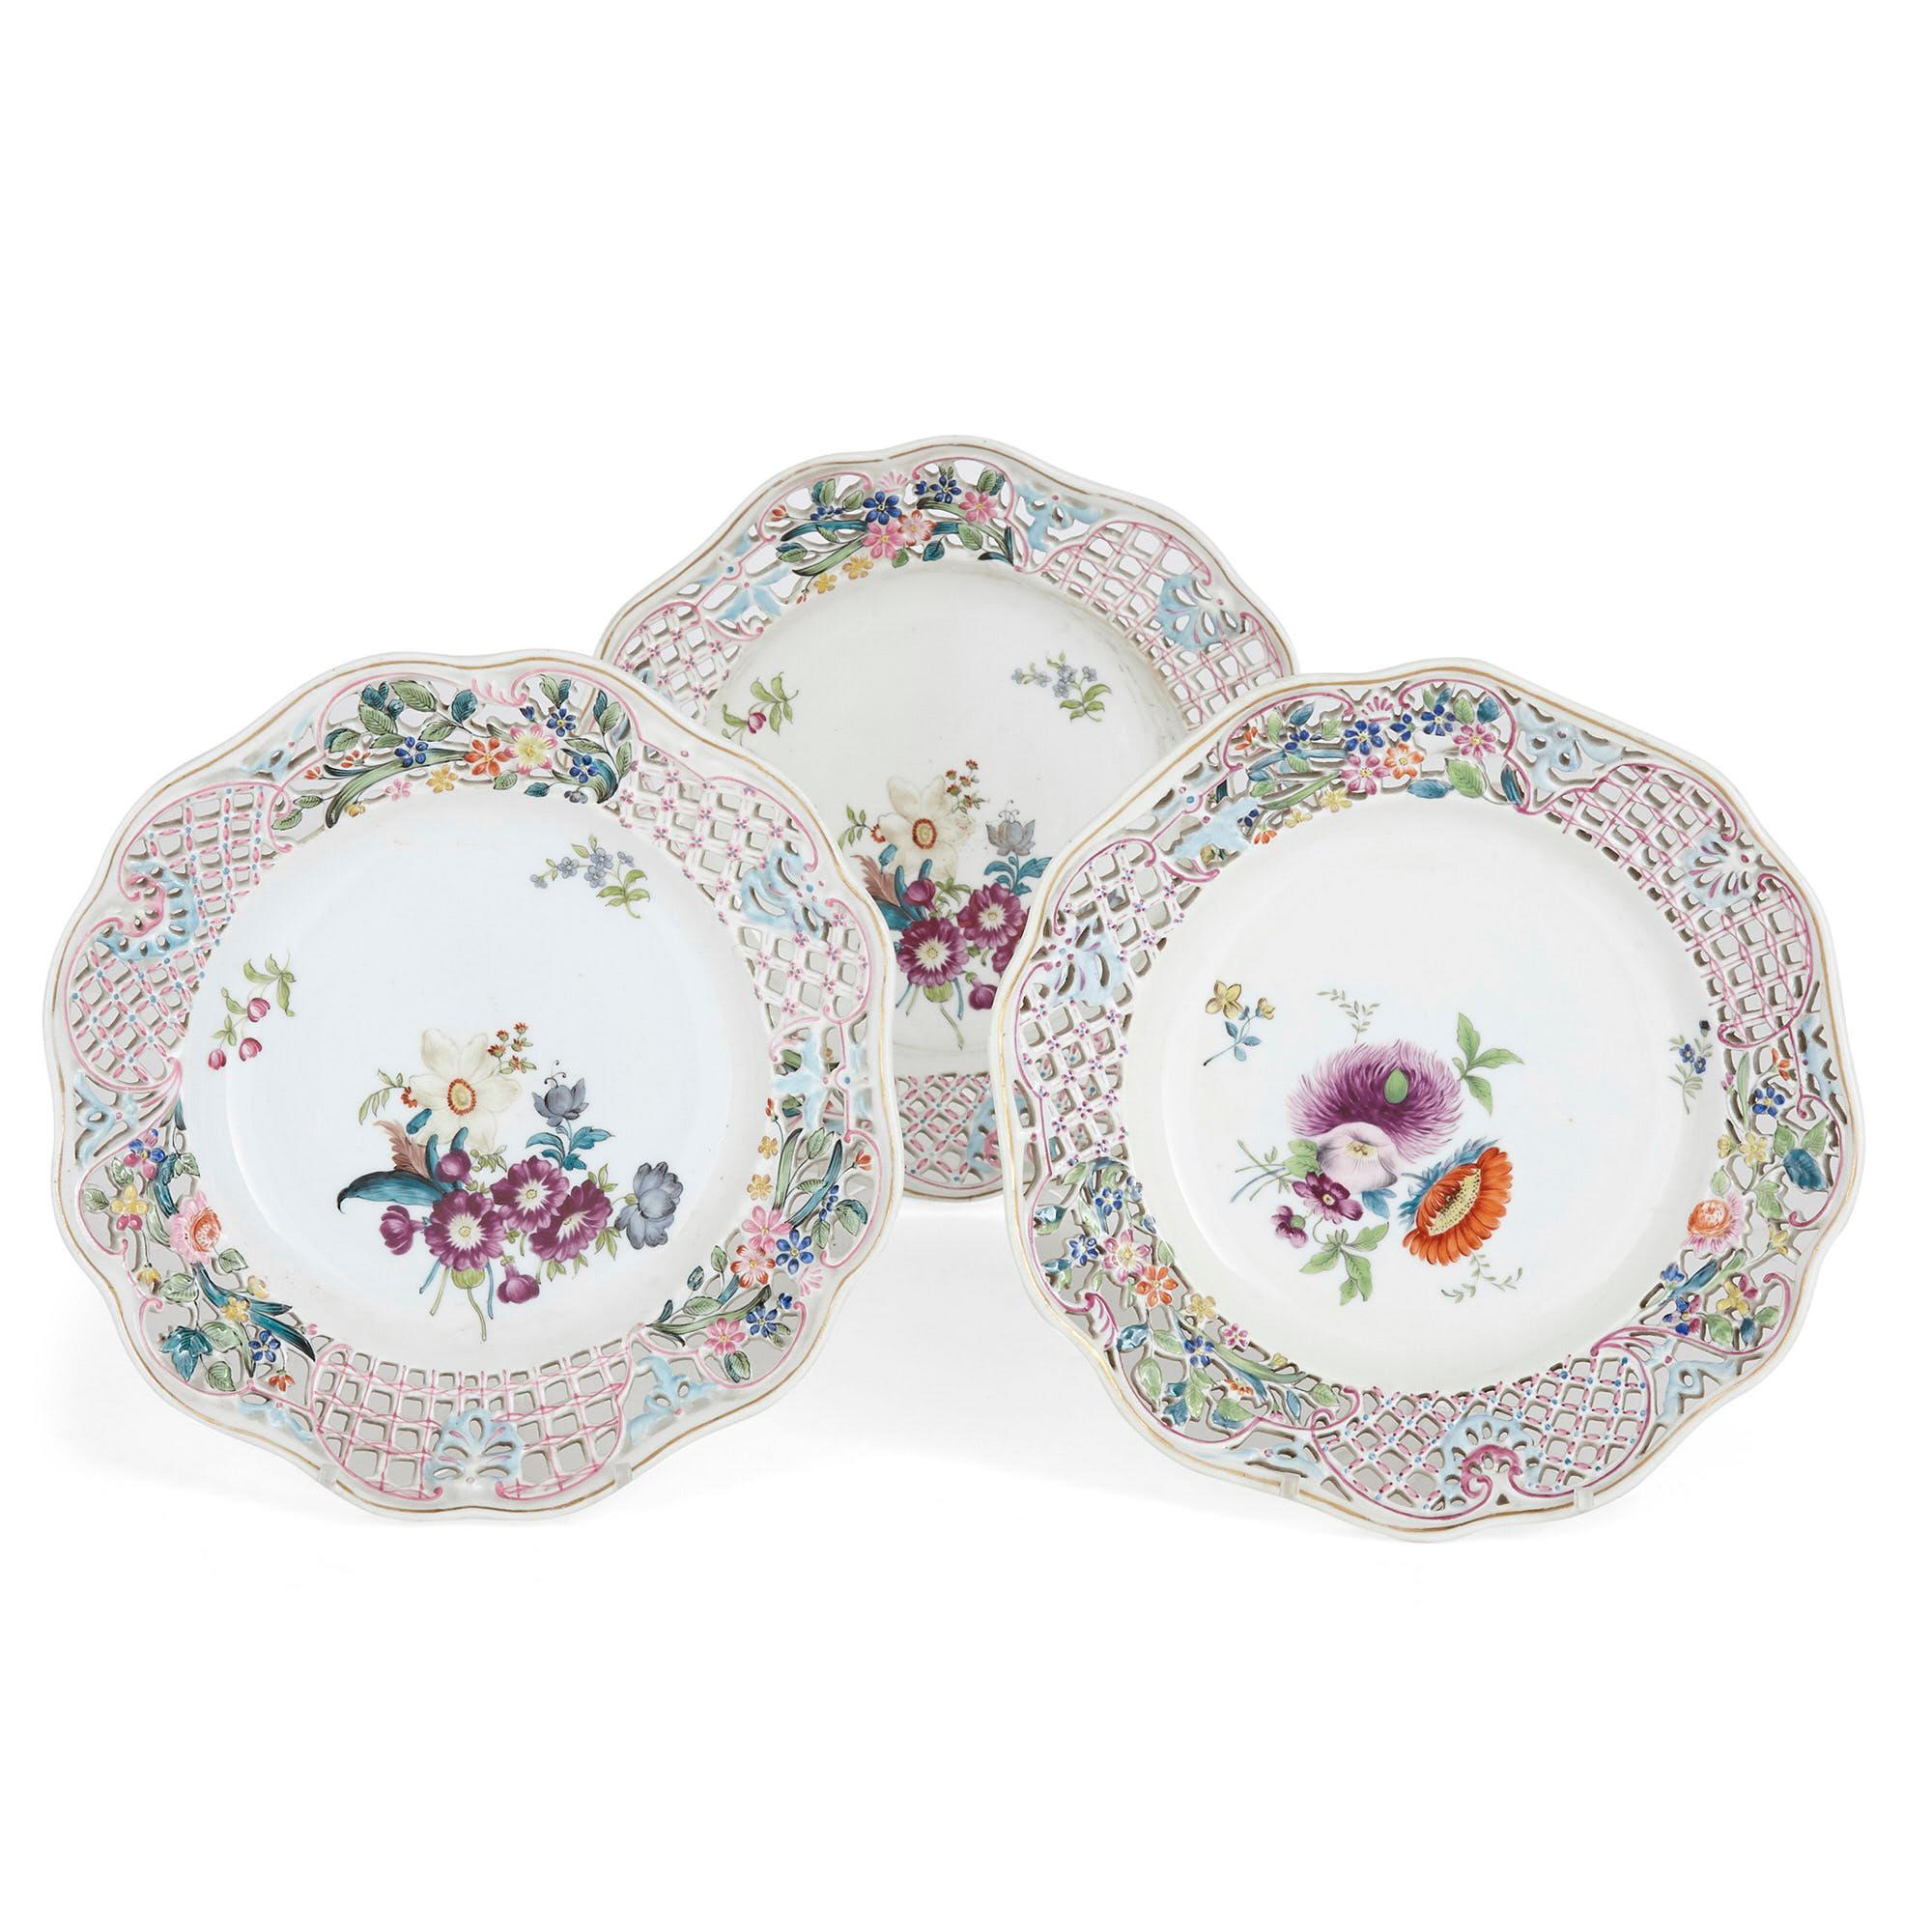 Collection of fourteen porcelain plates by various German makers
German, circa 1900
Measures: Largest height 4cm, diameter 23cm
Smallest height 3cm, diameter 19cm

Each of the fourteen plates in this collection is by an important German maker,